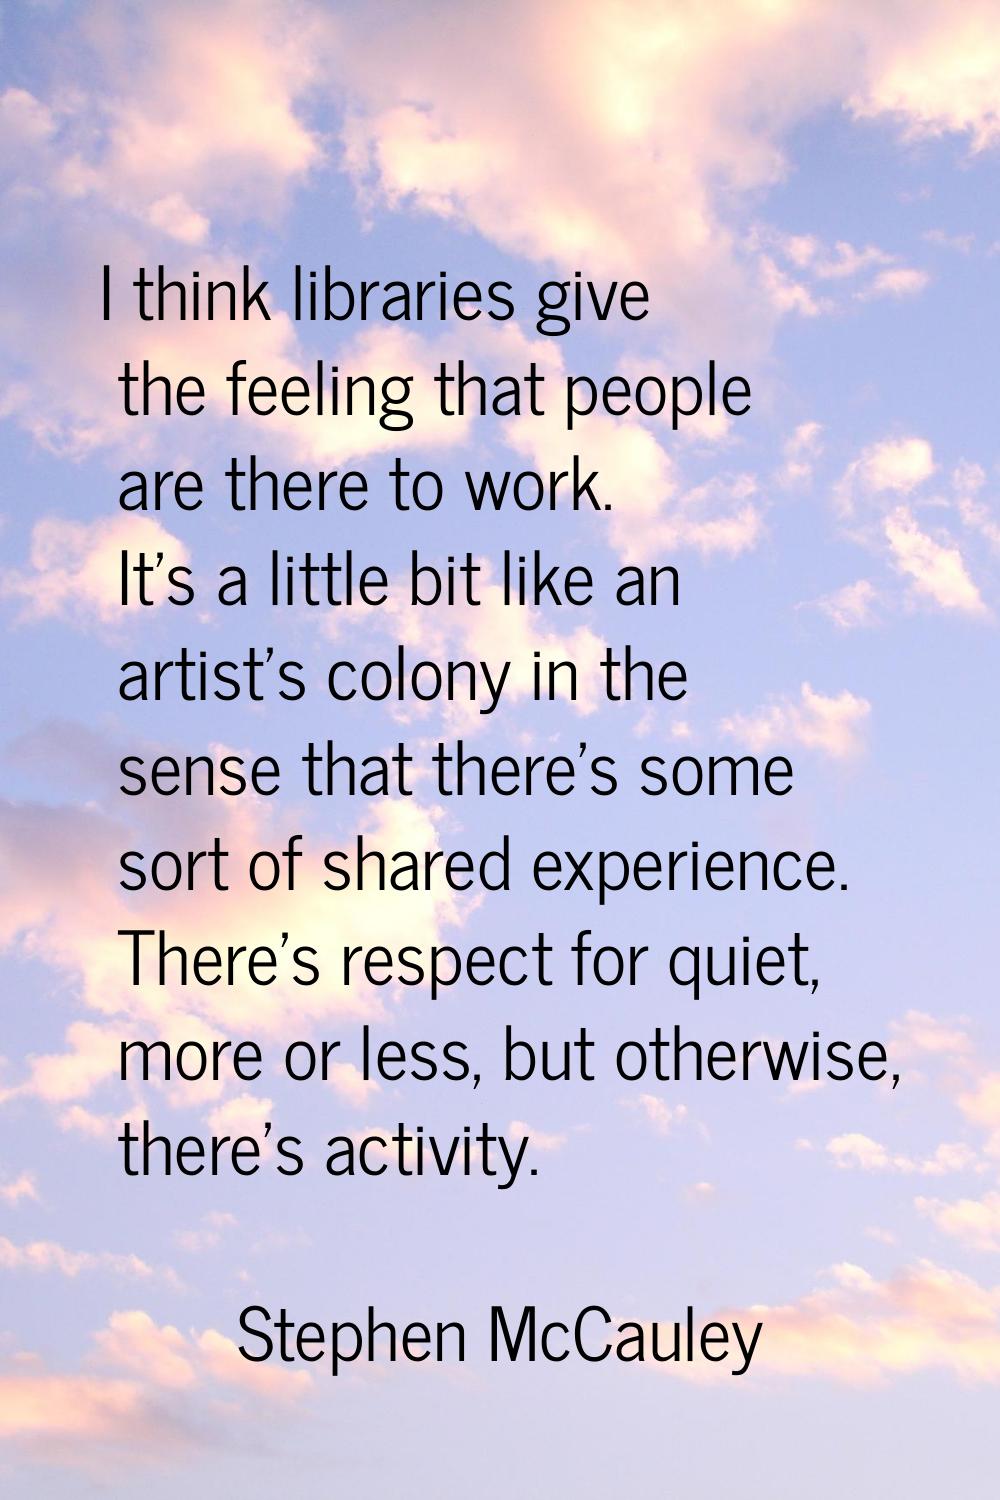 I think libraries give the feeling that people are there to work. It's a little bit like an artist'